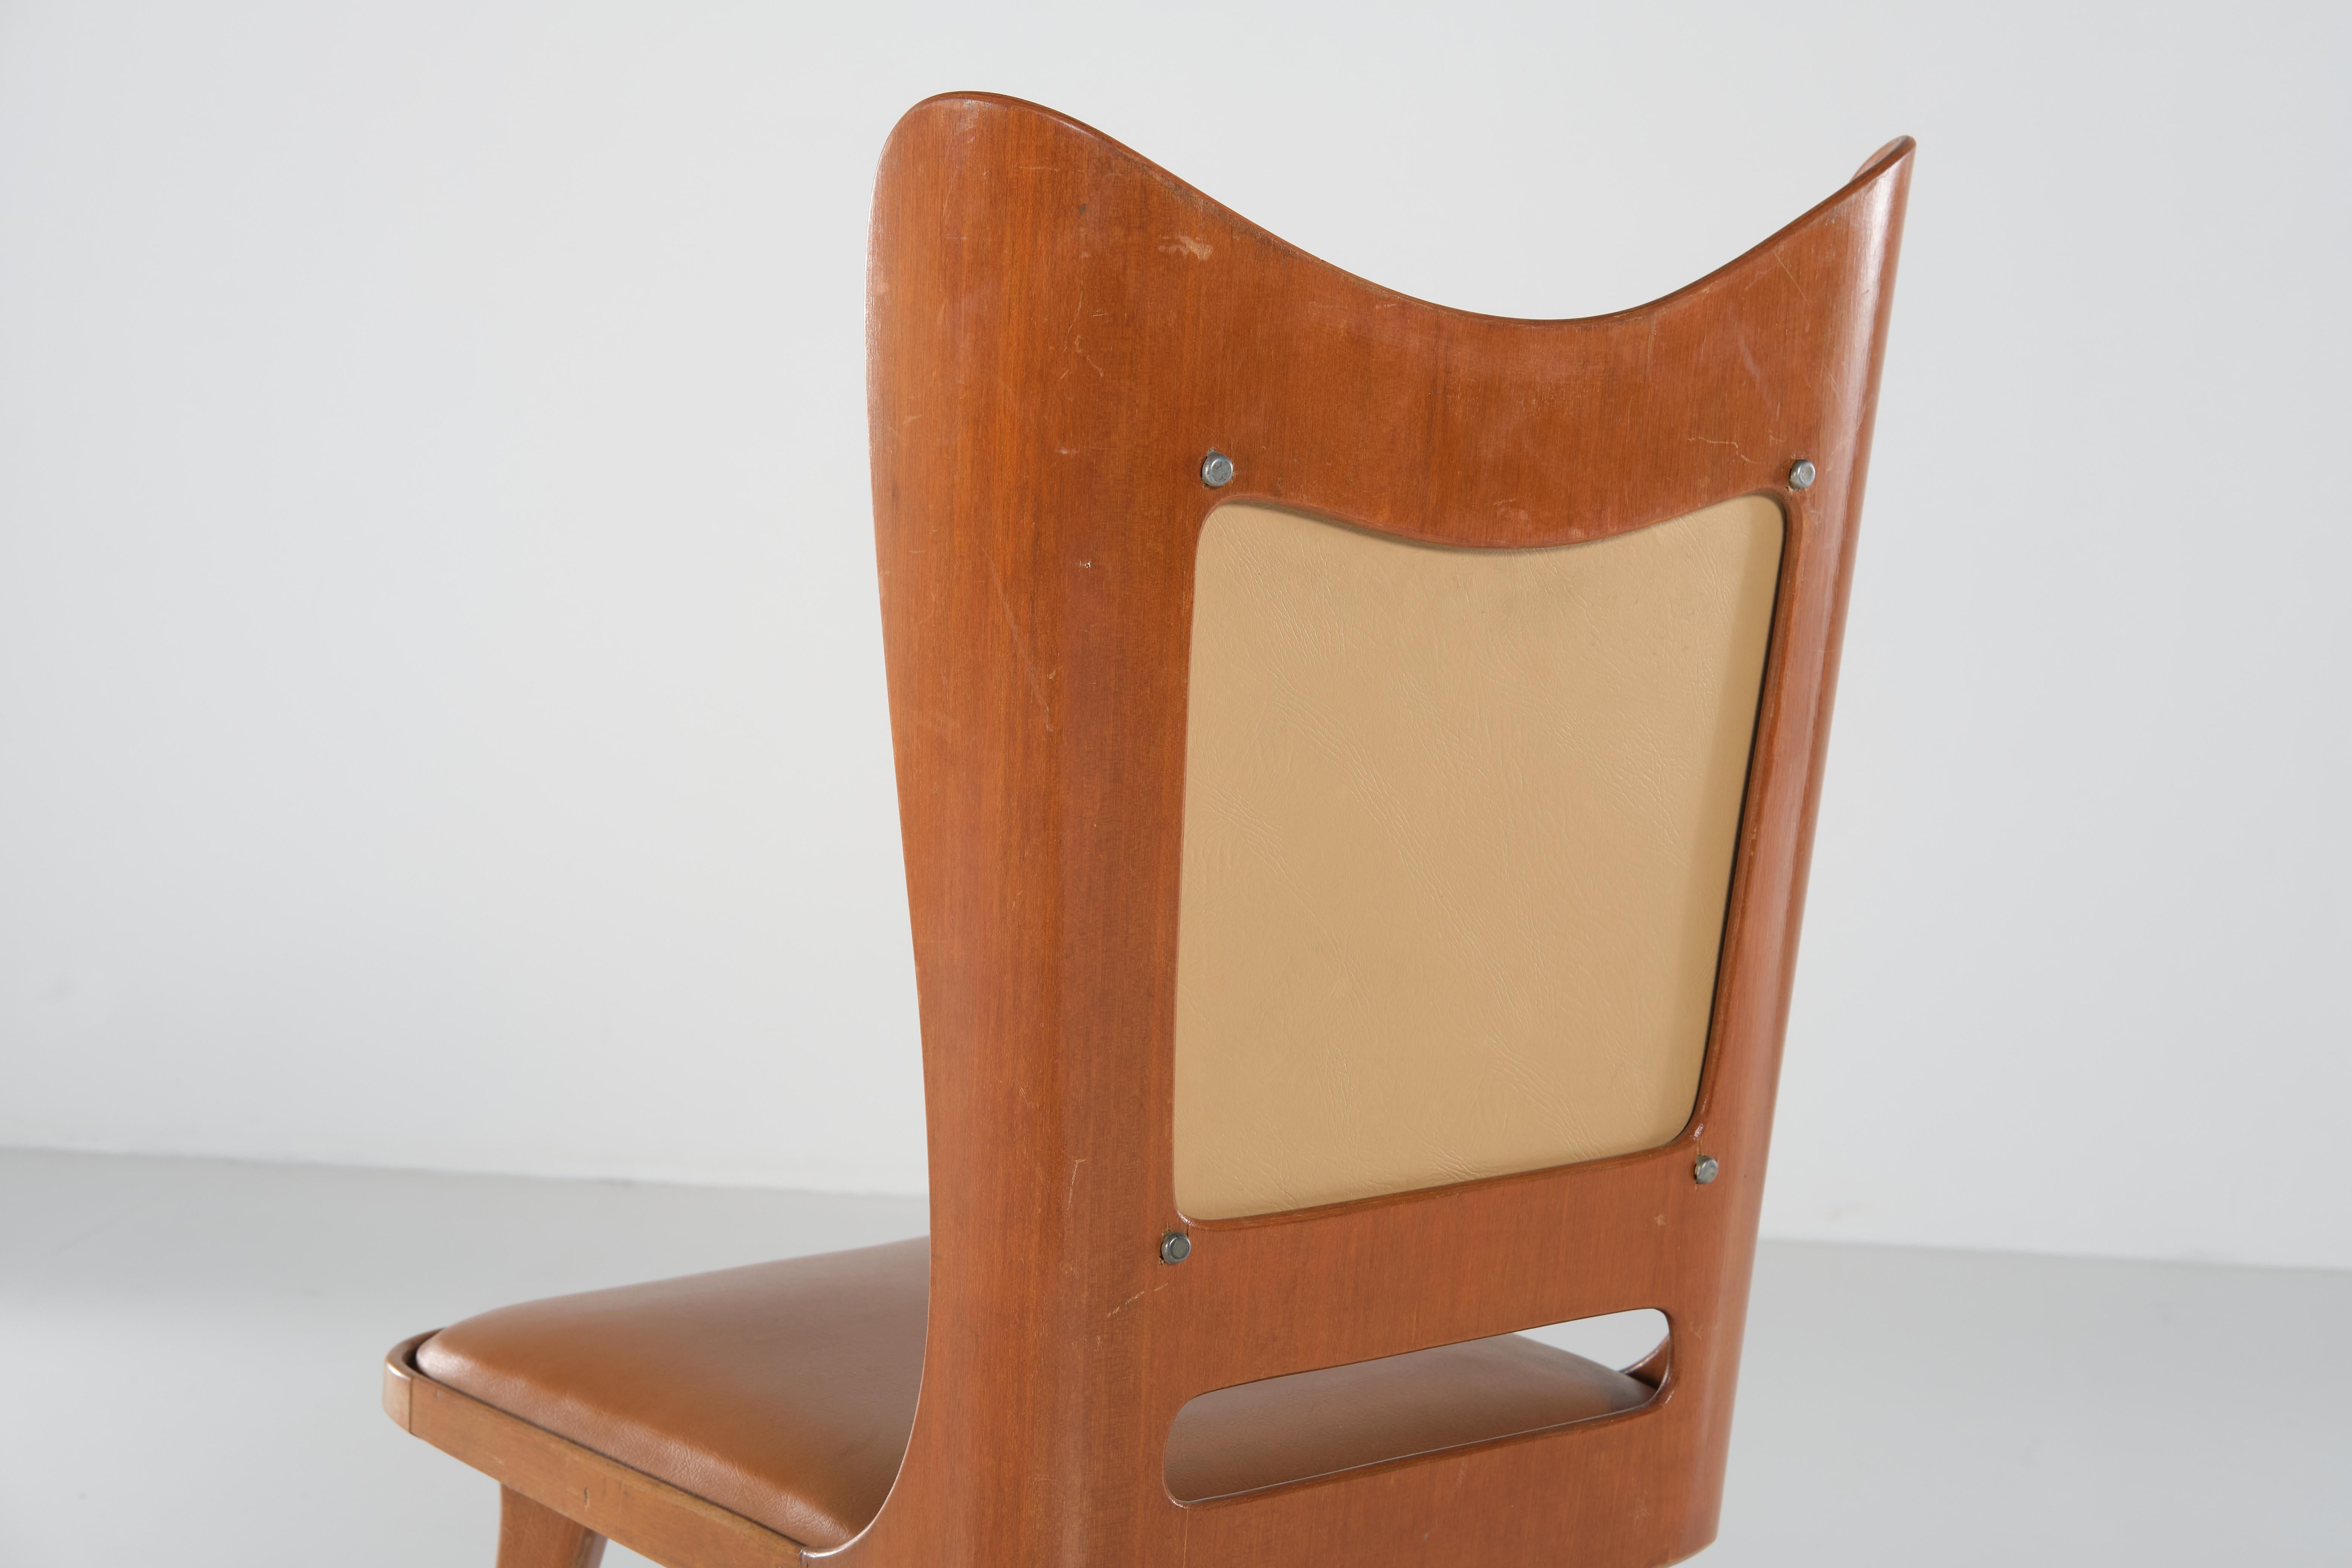 Carlo Ratti Set of 6 Chairs Wood Plywood and Faux Leather, Italian Design 1950s For Sale 4